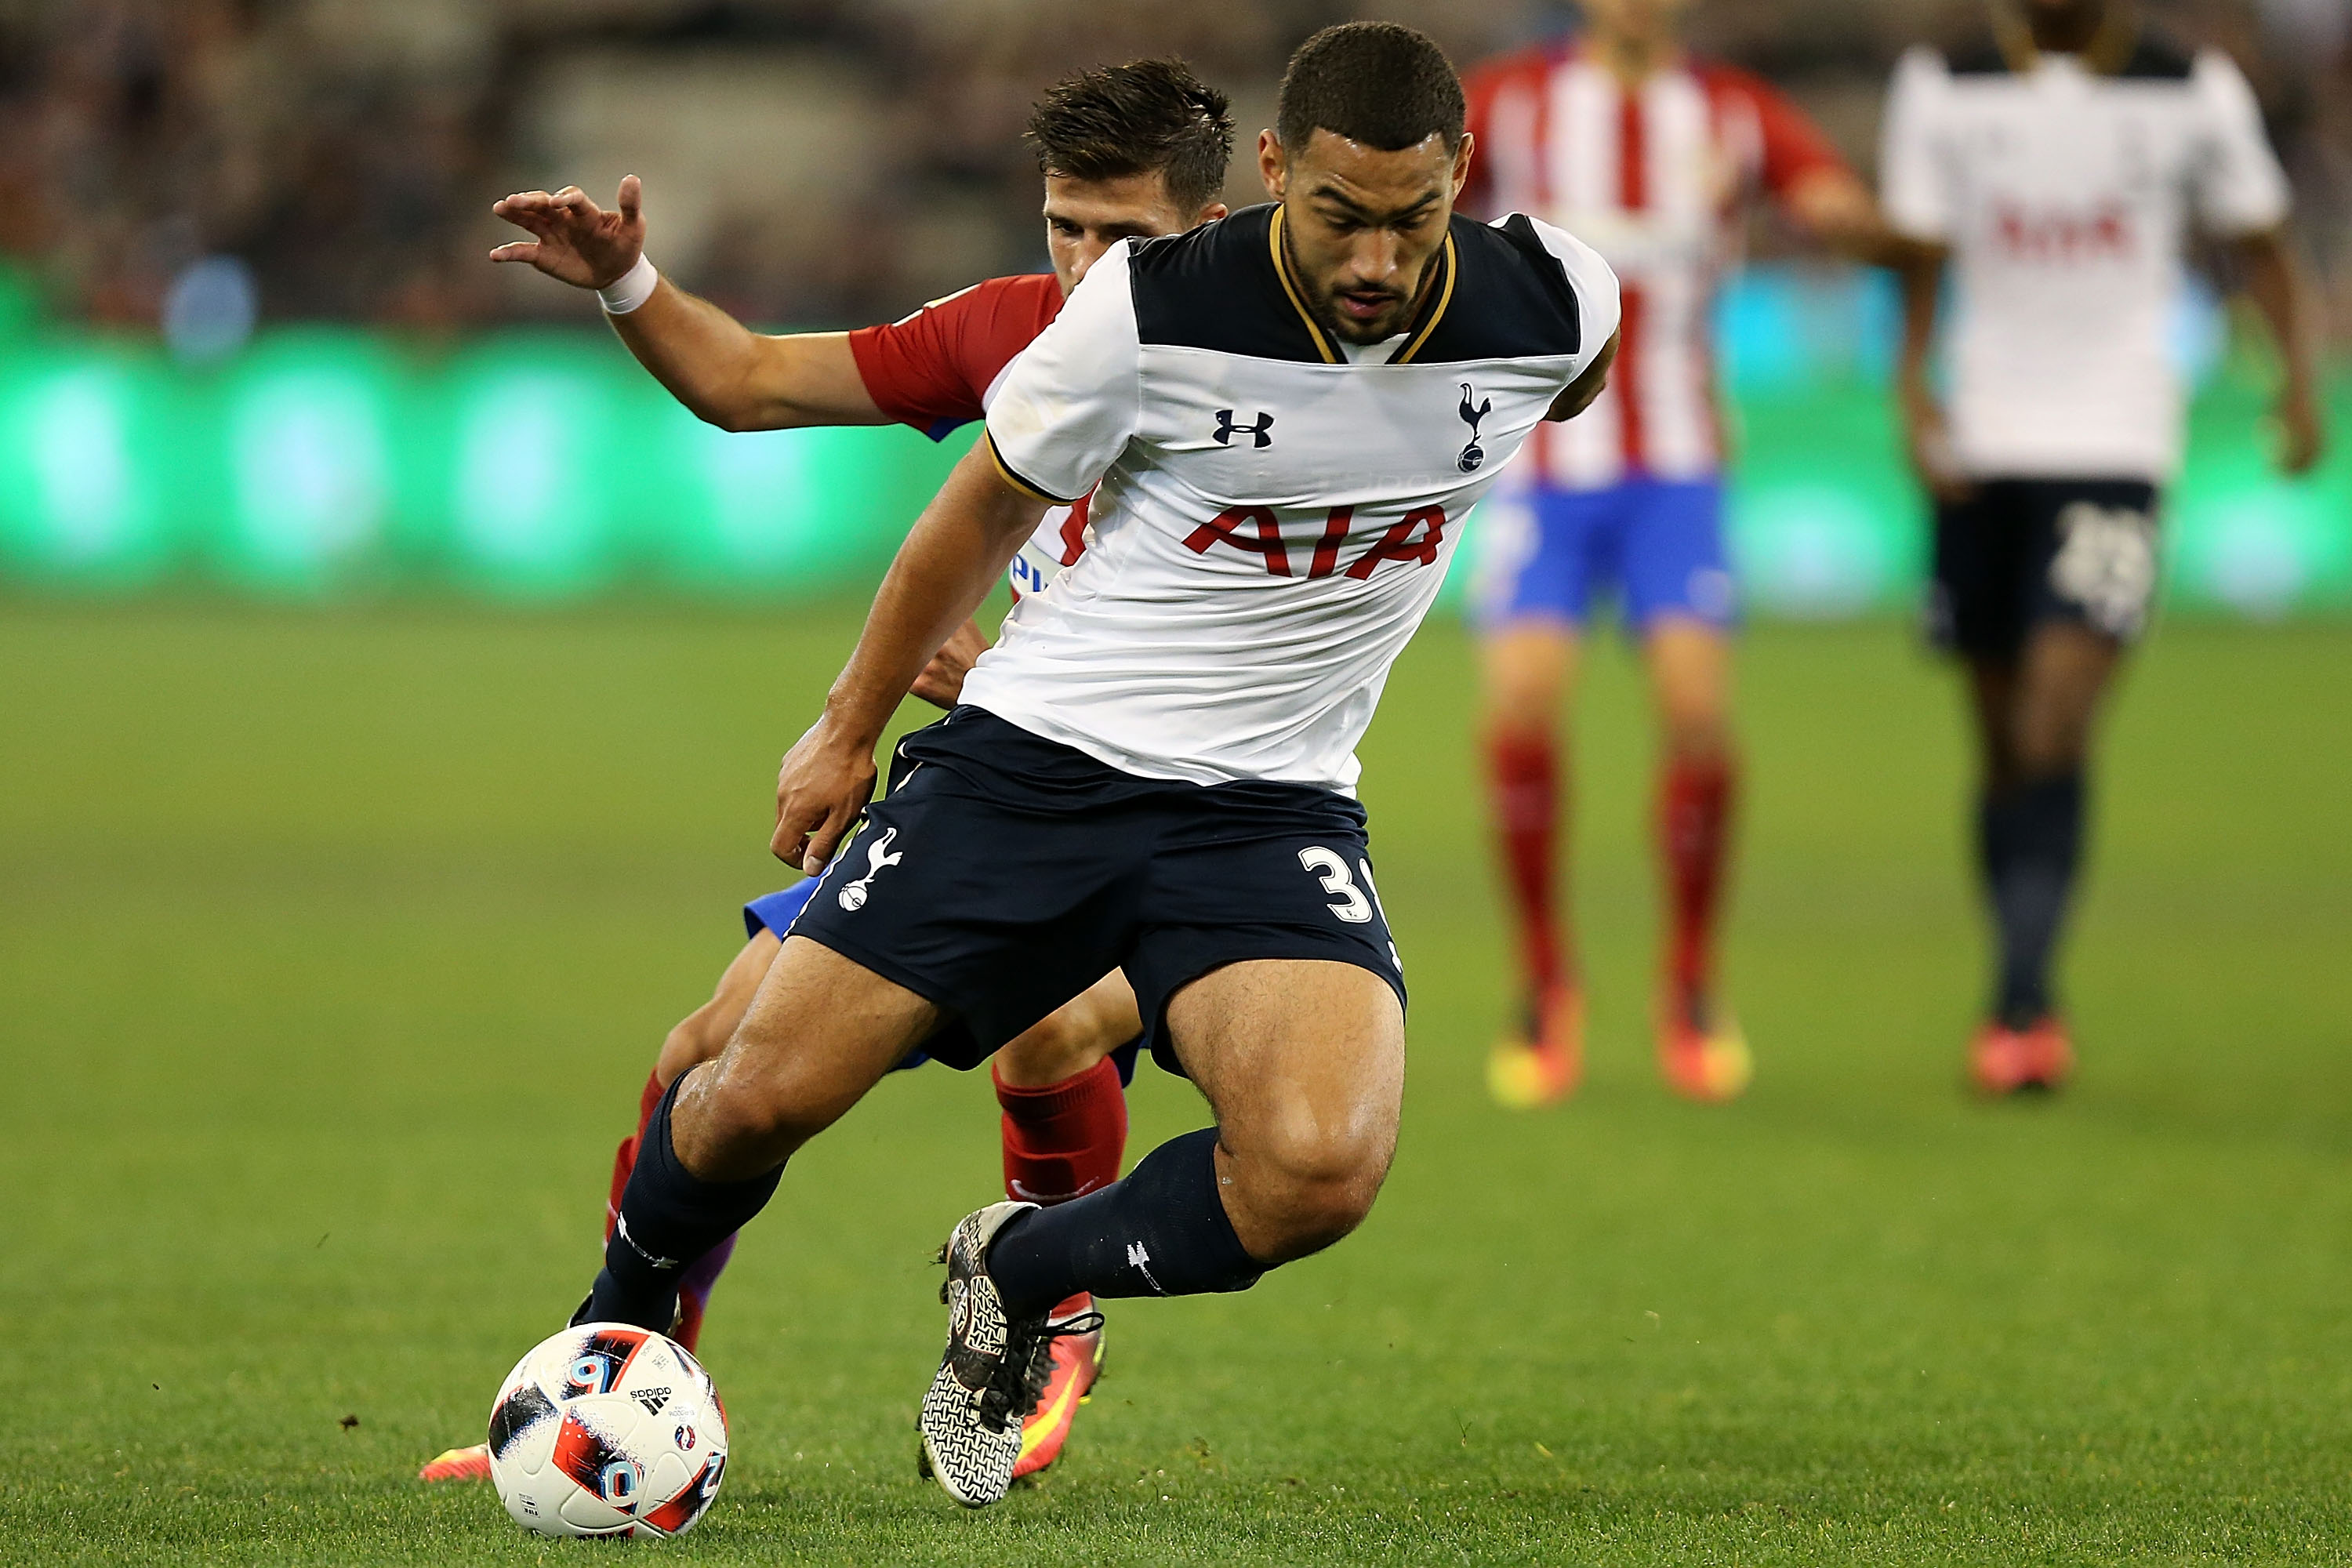 MELBOURNE, AUSTRALIA - JULY 29:  Cameron Carter-Vickers of Tottenham runs with the ball during 2016 International Champions Cup Australia match between Tottenham Hotspur and Atletico de Madrid at Melbourne Cricket Ground on July 29, 2016 in Melbourne, Australia.  (Photo by Jack Thomas/Getty Images)